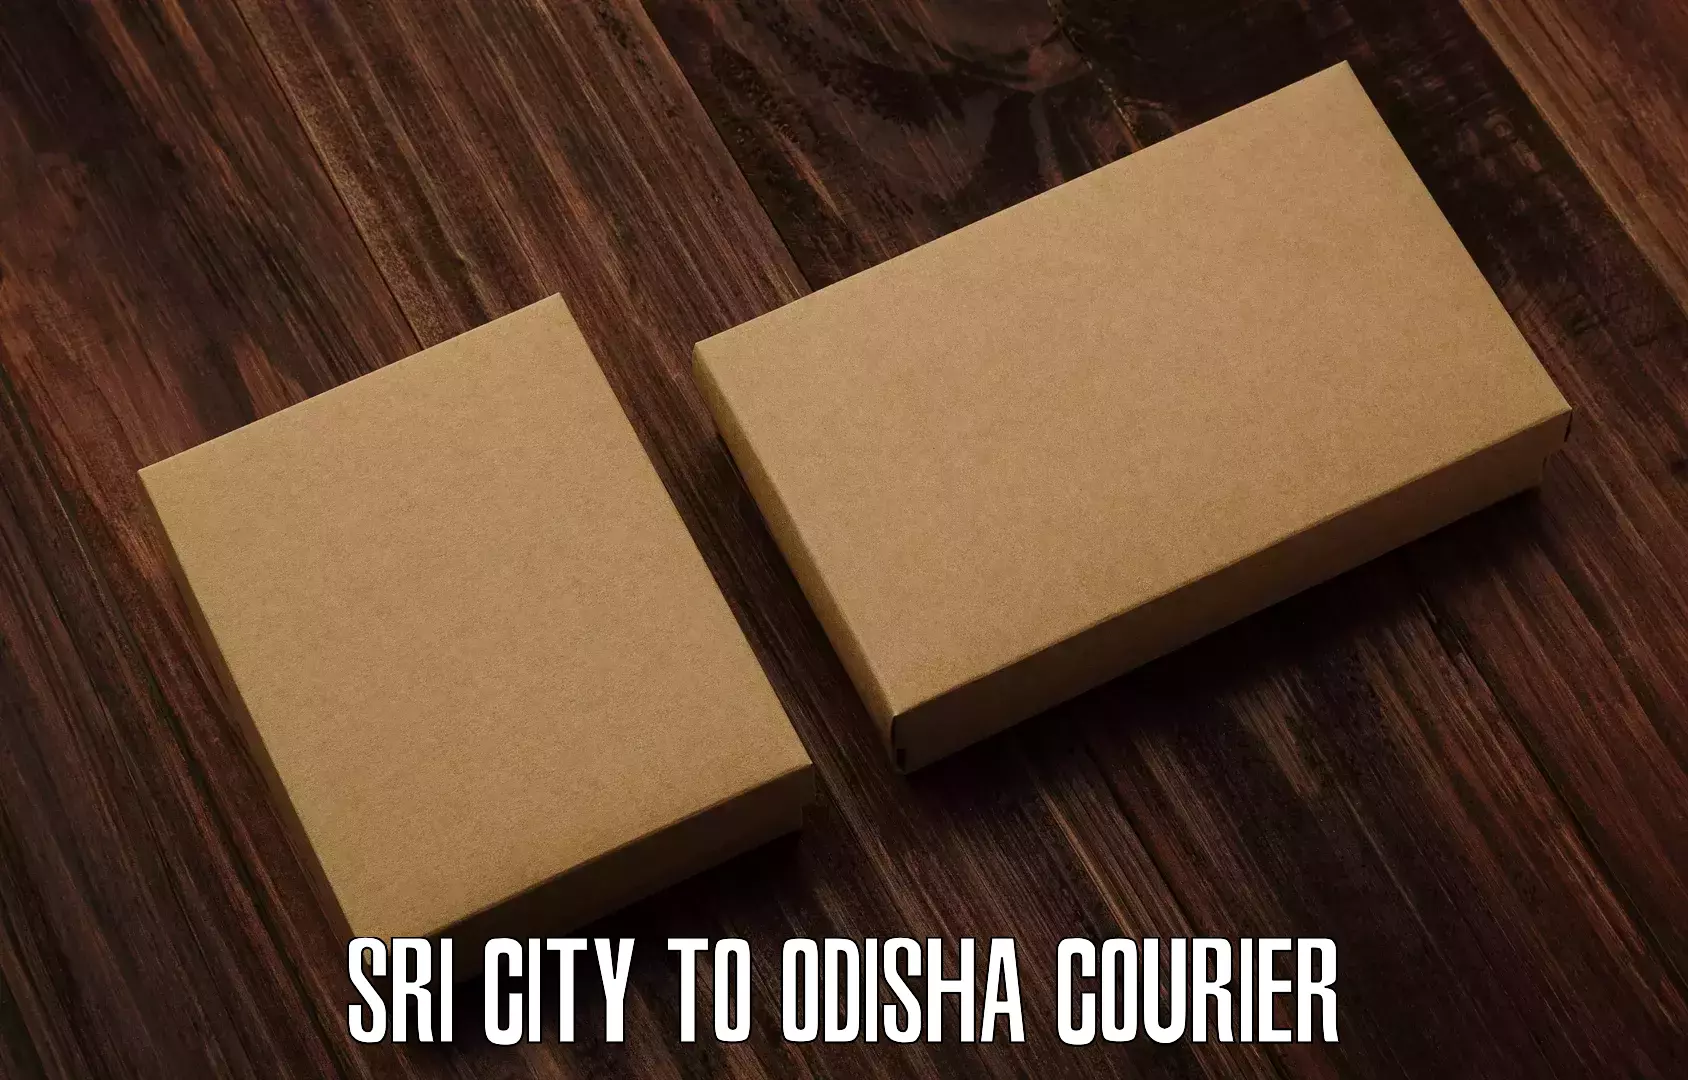 Personal courier services Sri City to Odisha